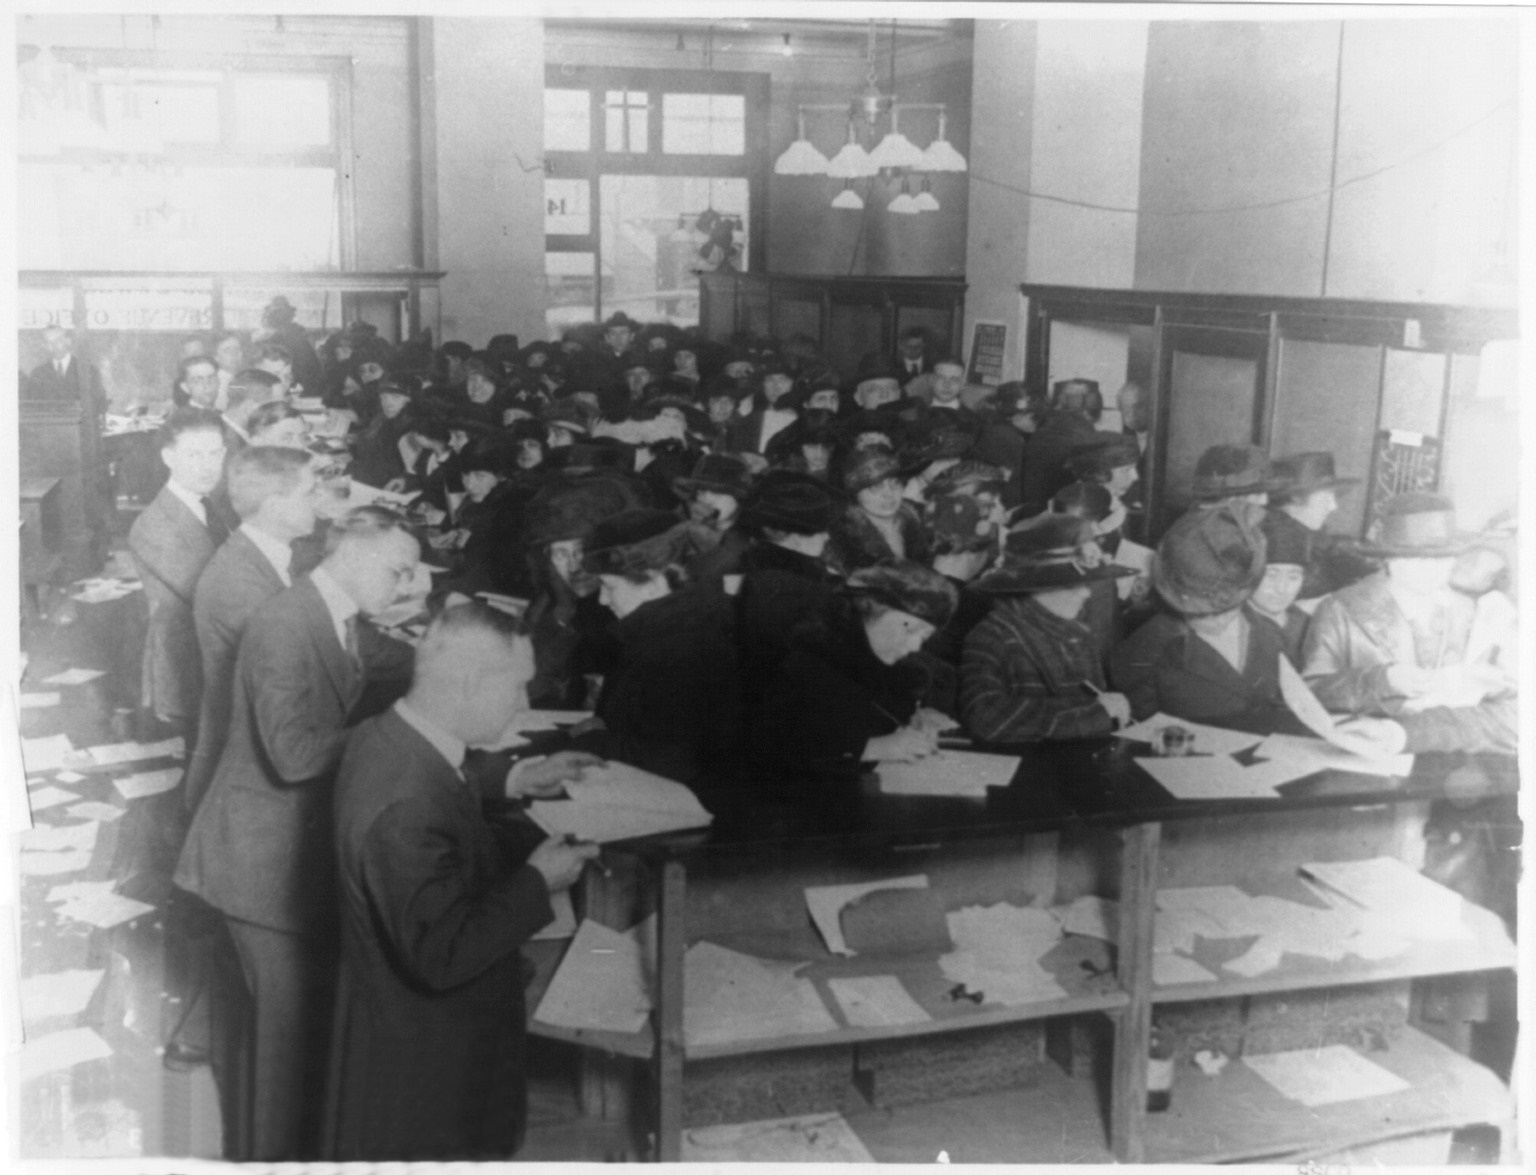 Filing tax form in 1920s at IRS